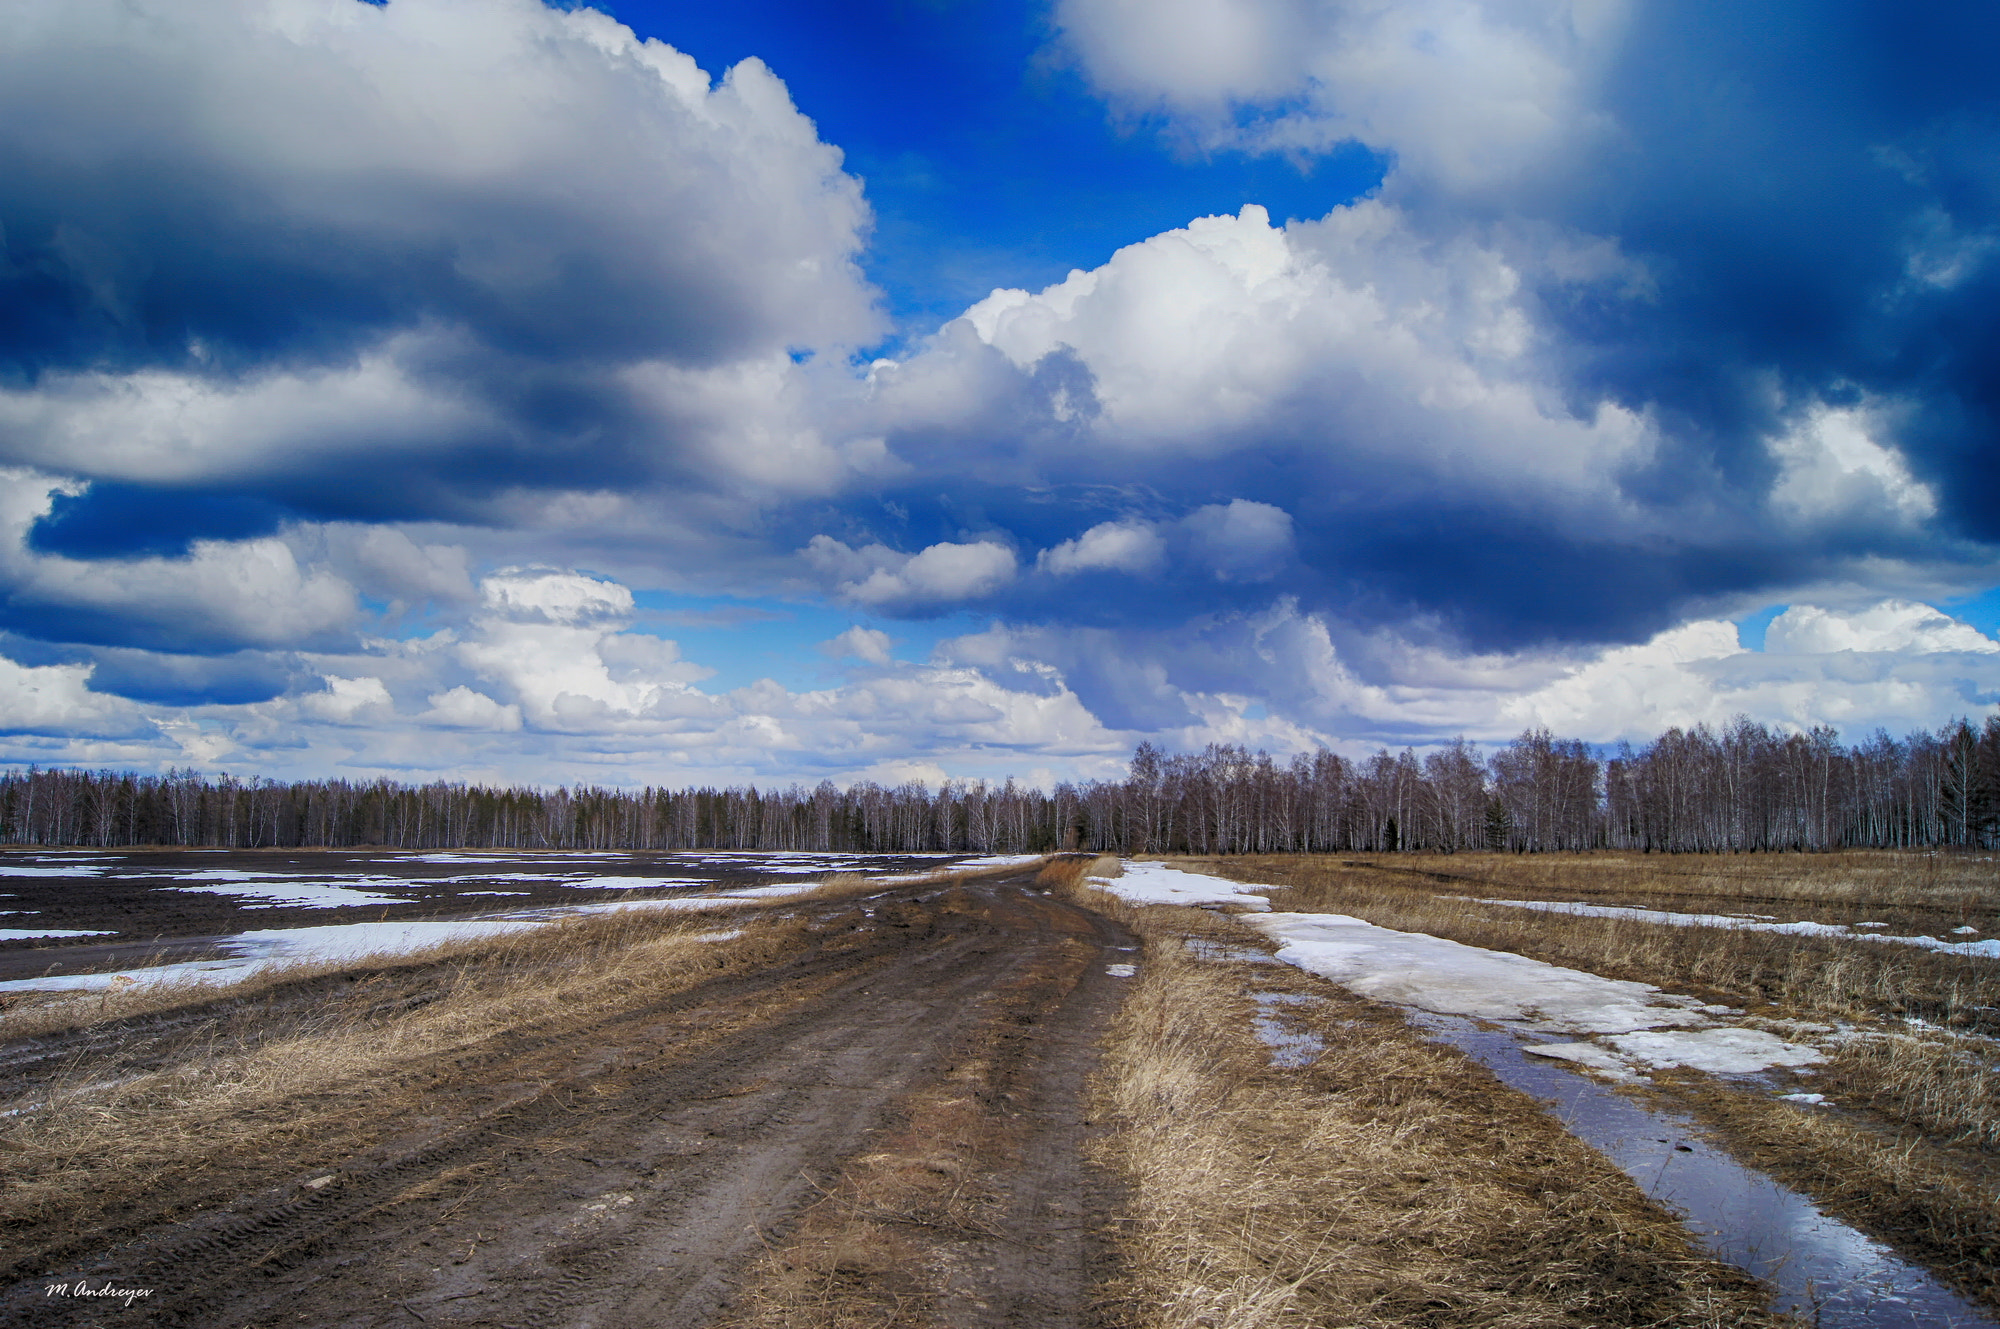 Sony Alpha DSLR-A580 sample photo. The road through the field photography